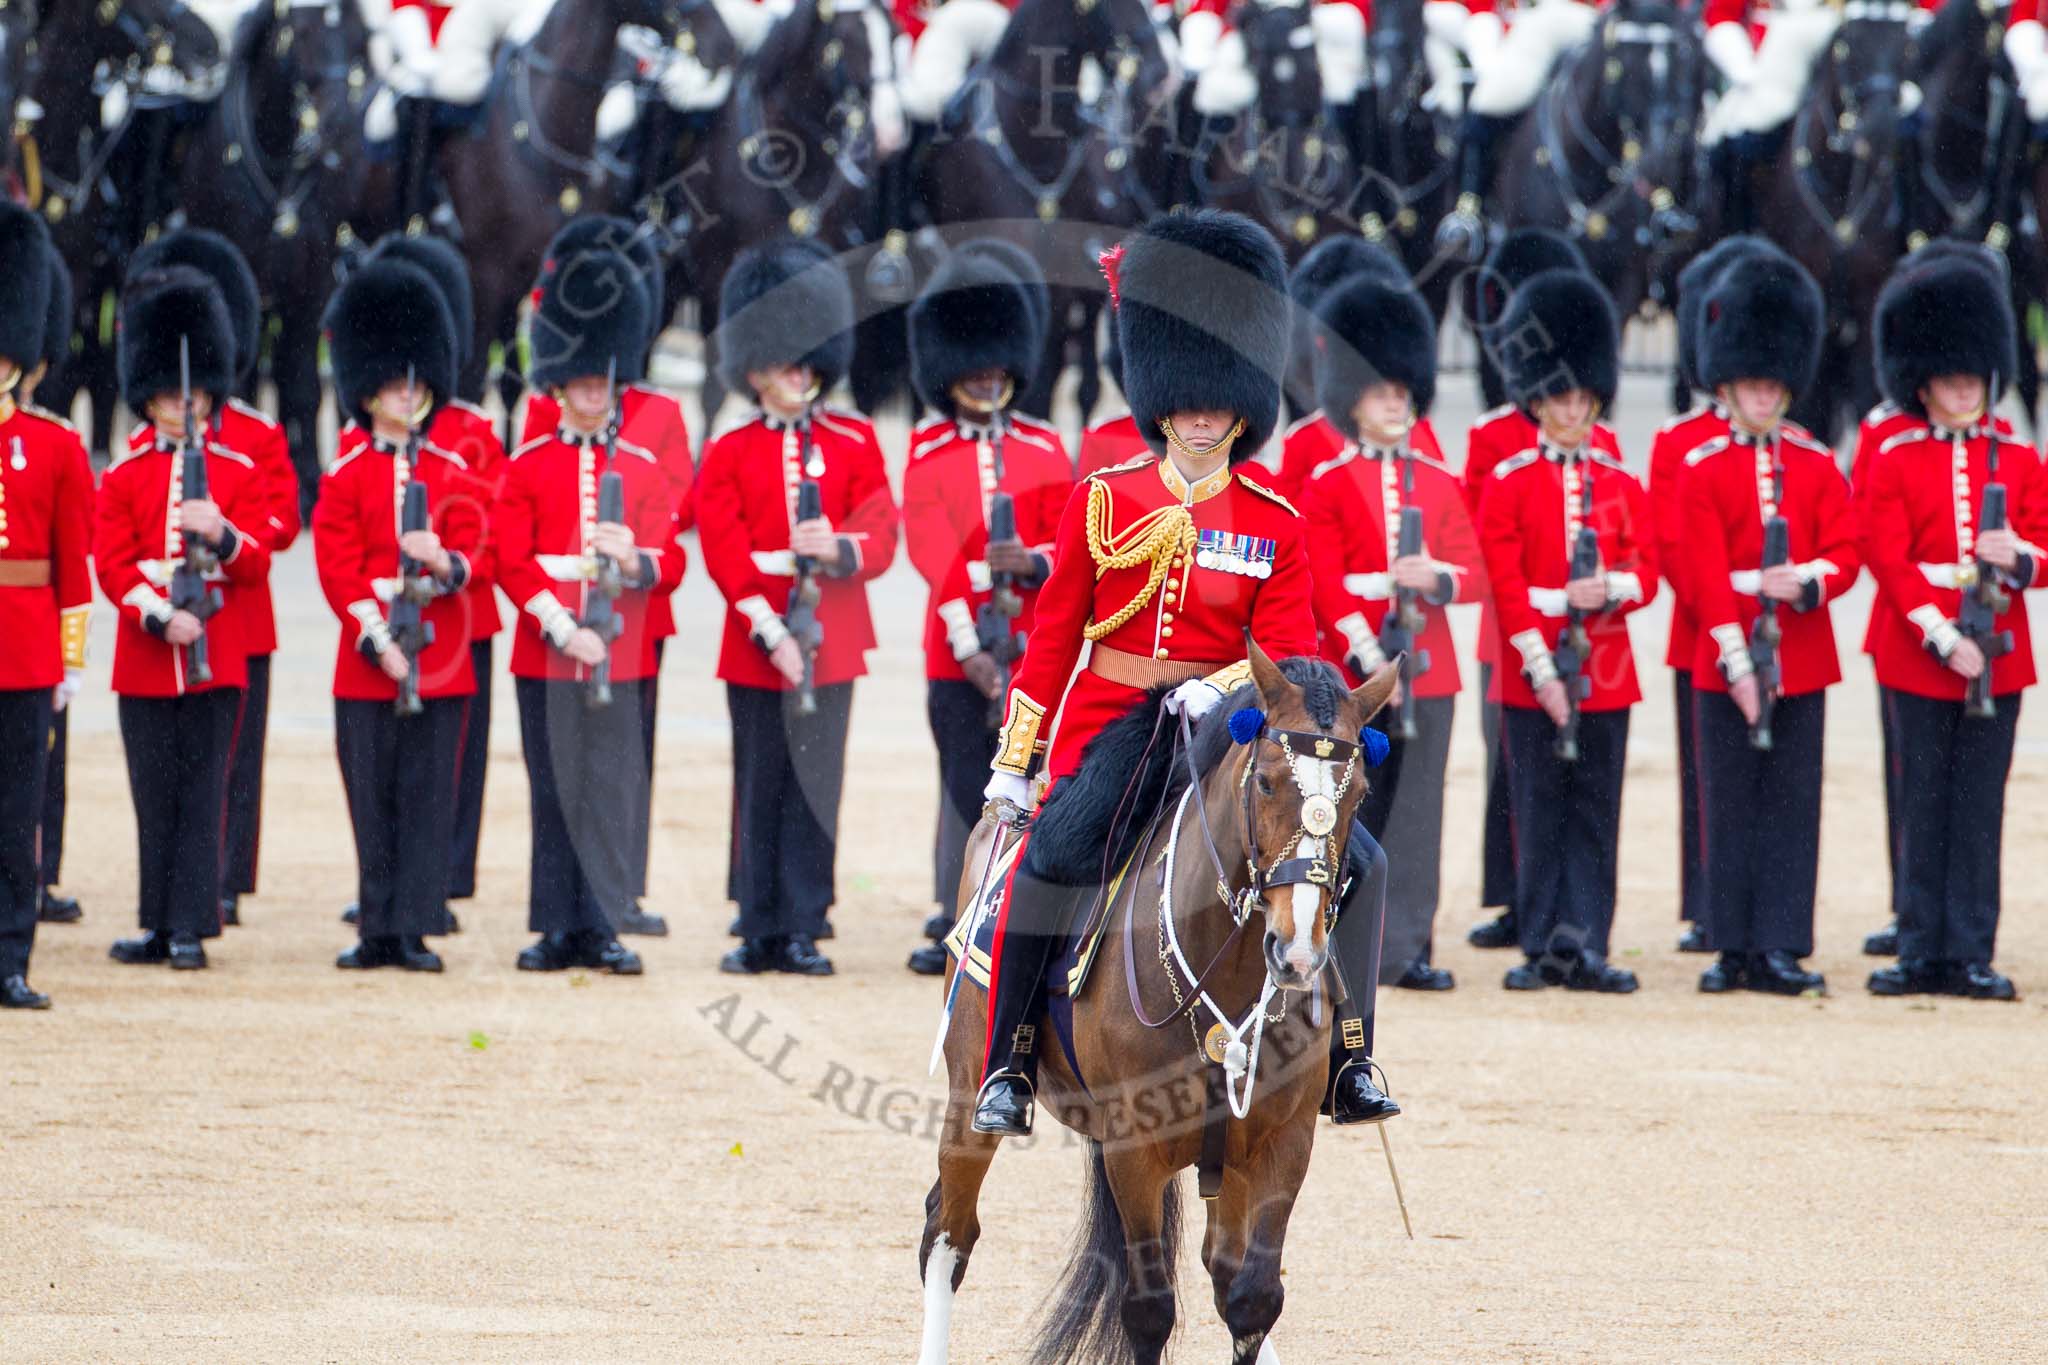 Trooping the Colour 2012: The Field Officer in Brigade Waiting, Lieutenant Colonel R C N Sergeant, Coldstream Guards, during the troping of the Colour through the ranks..
Horse Guards Parade, Westminster,
London SW1,

United Kingdom,
on 16 June 2012 at 11:26, image #345